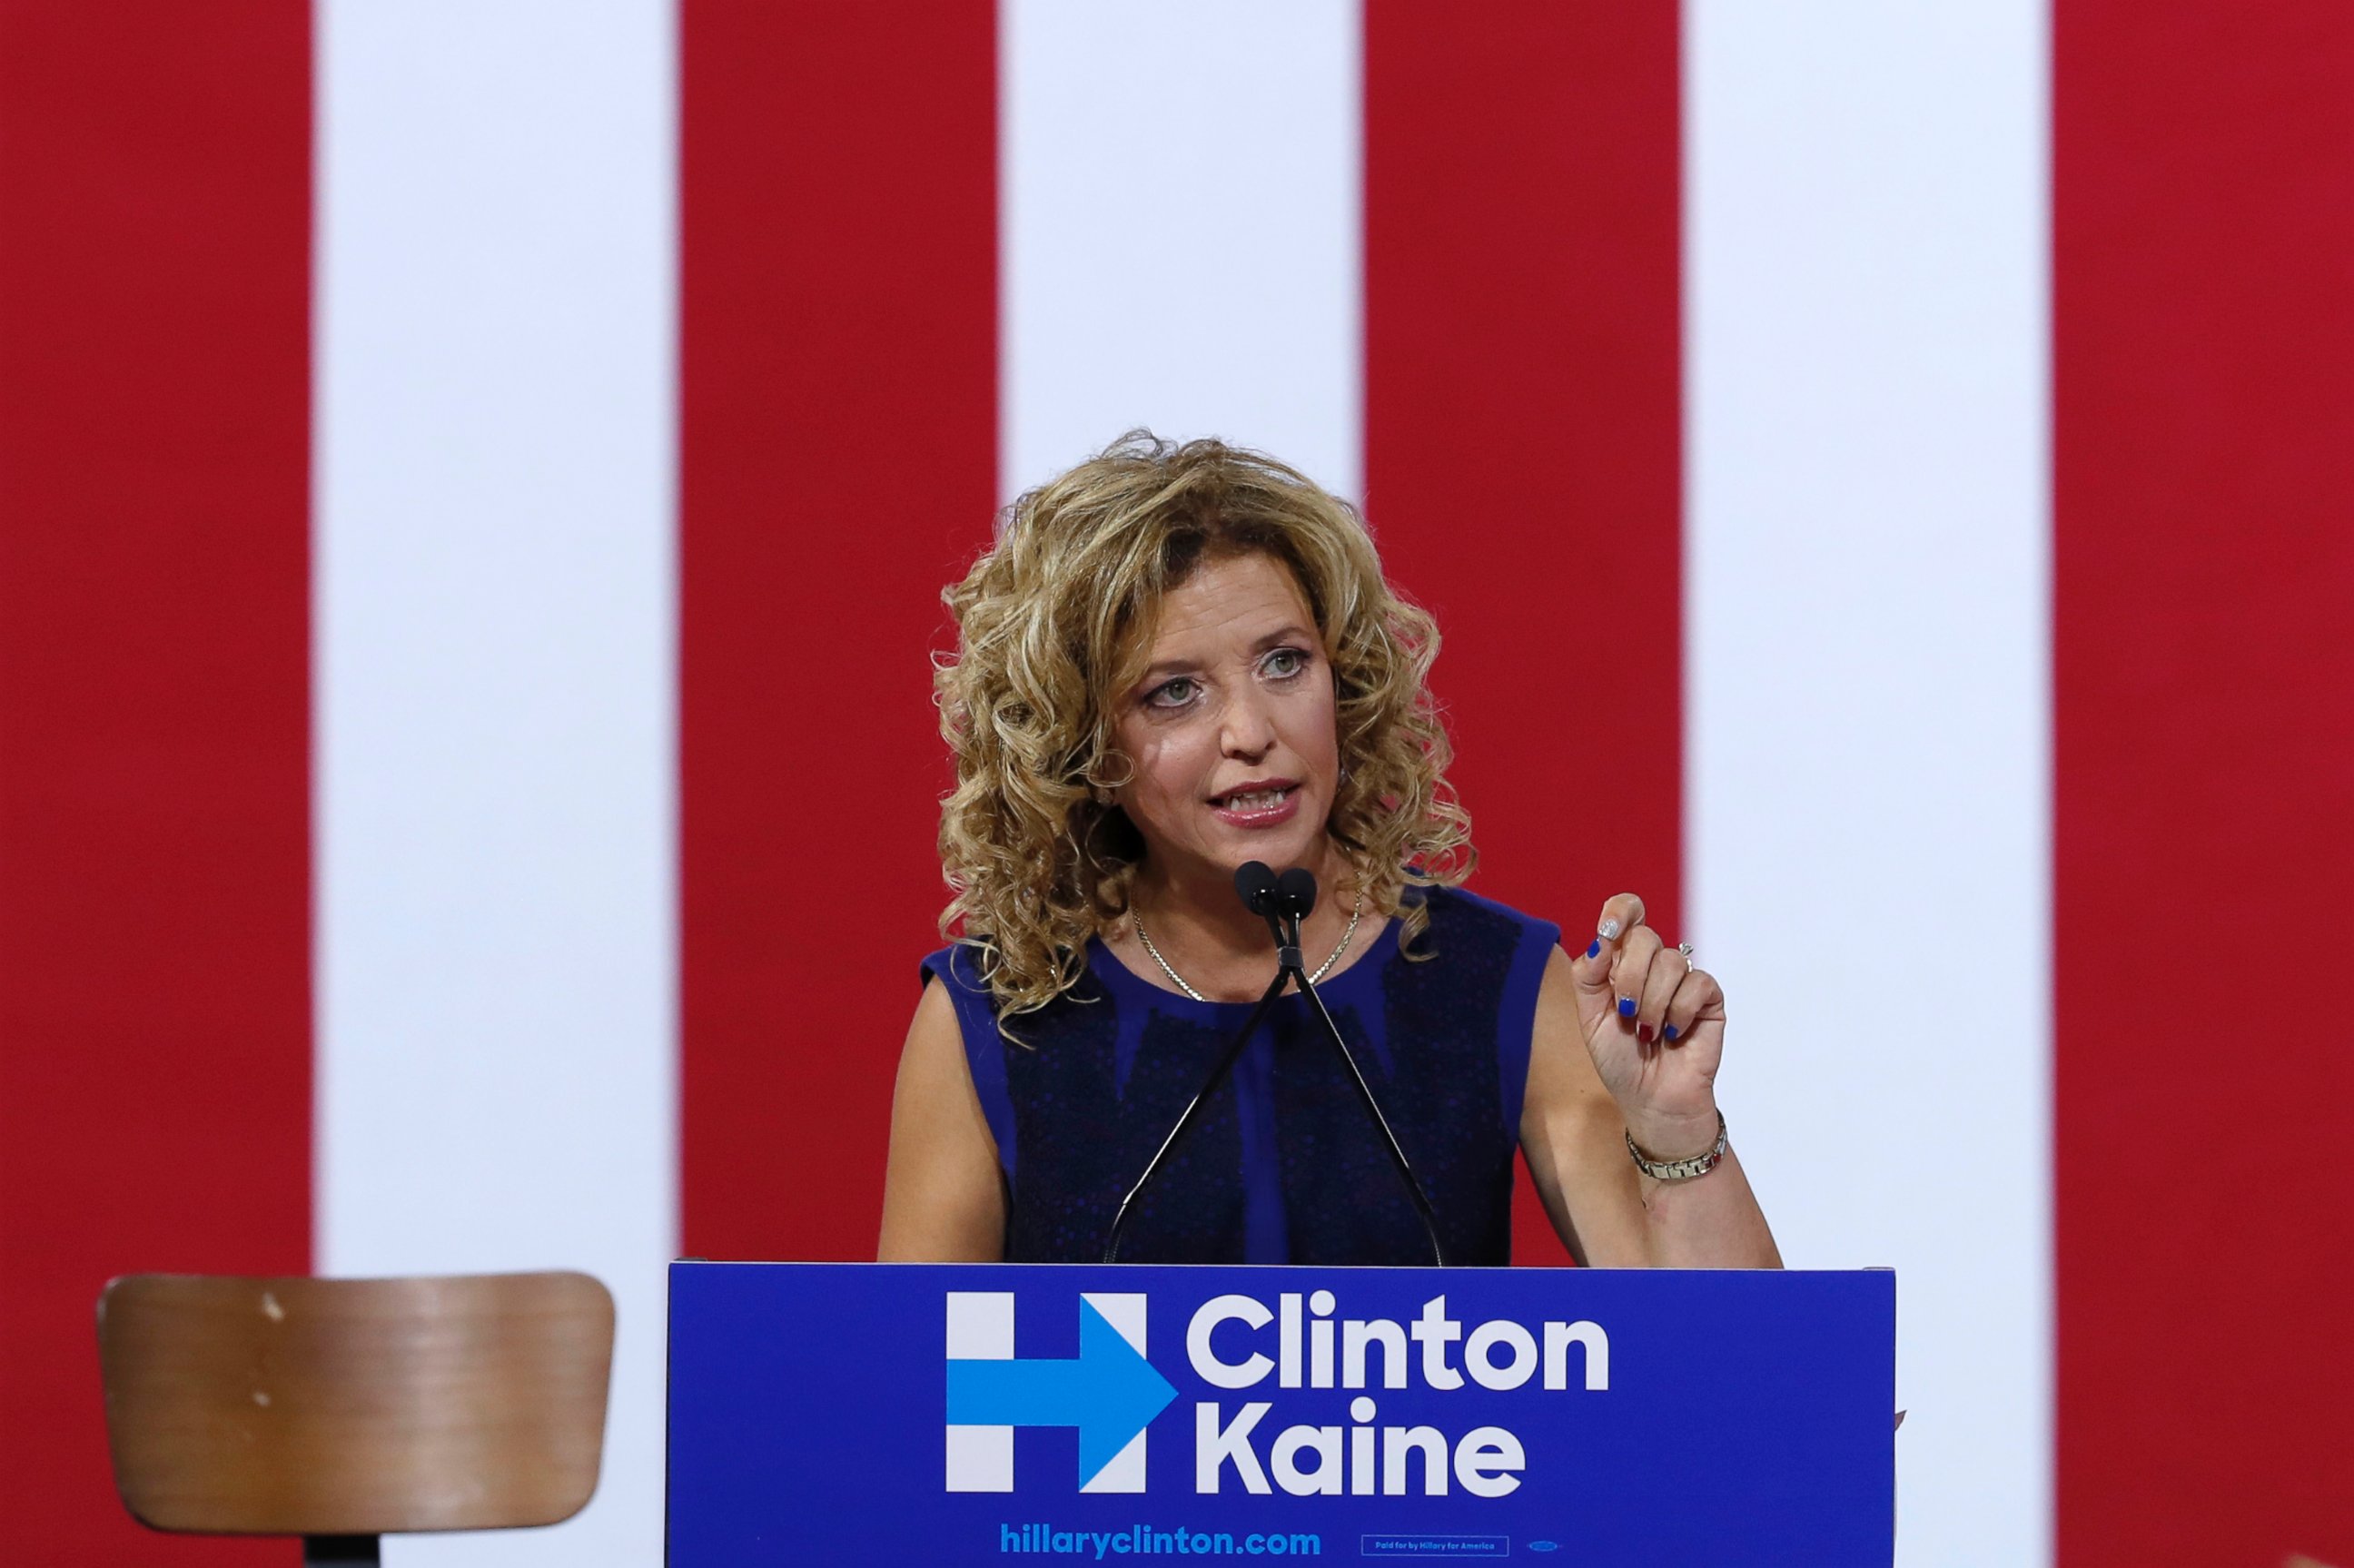 PHOTO: DNC Chairwoman, Debbie Wasserman Schultz speaks during a campaign event for Democratic presidential candidate Hillary Clinton, July 23, 2016, in Miami.